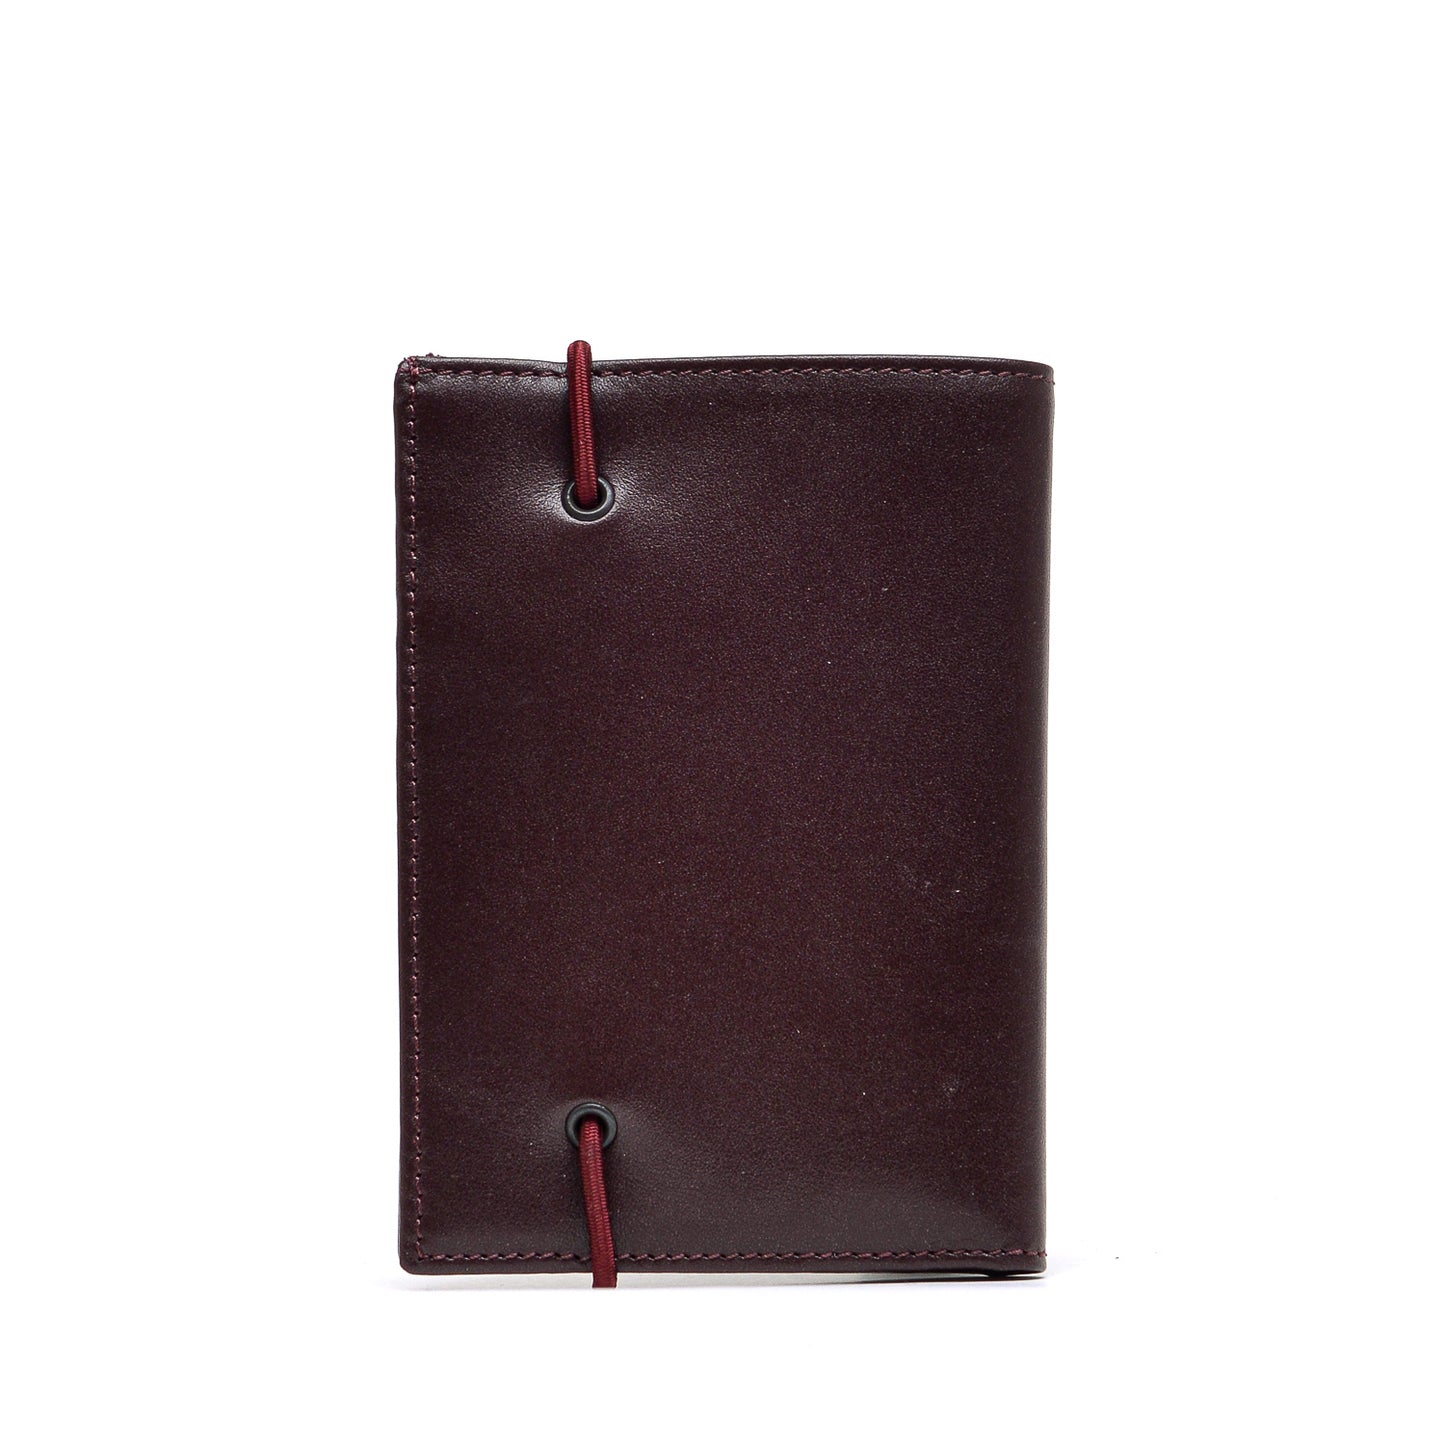 Classic Folding Wallet 1 side Leather Bordeuax